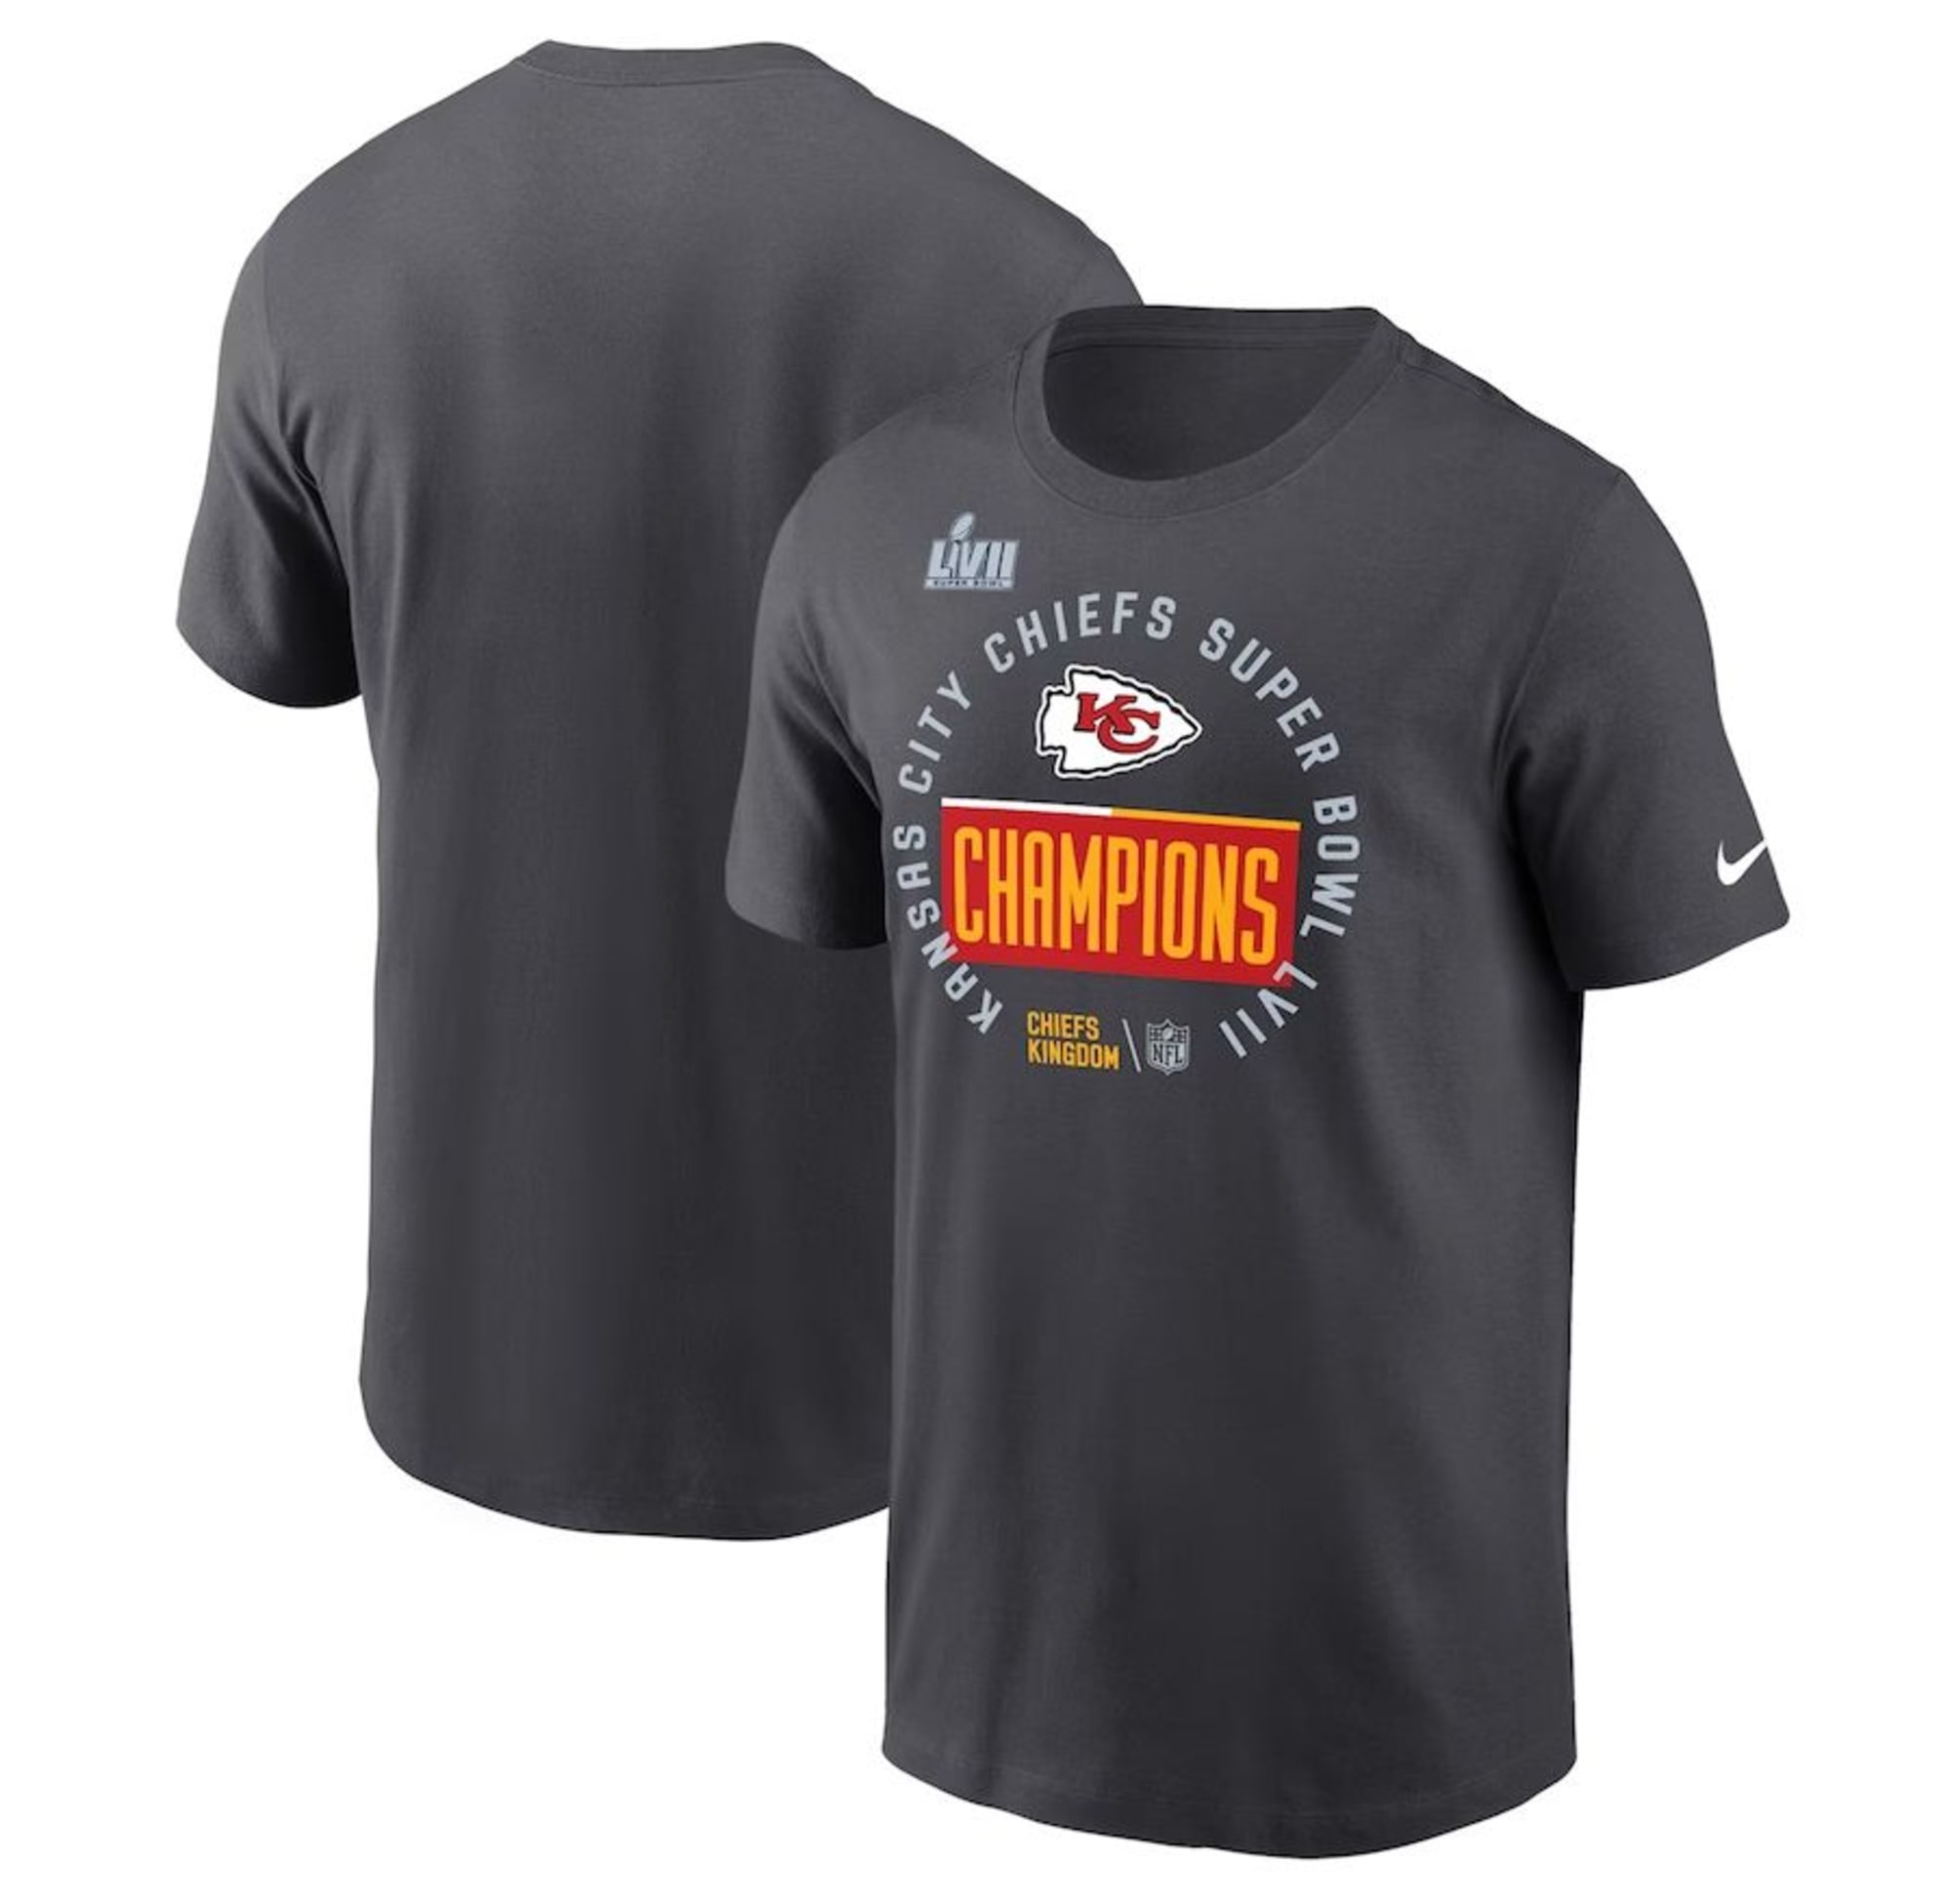 Chiefs Are Champs! Order your Kansas City Chiefs Super Bowl Champions ...